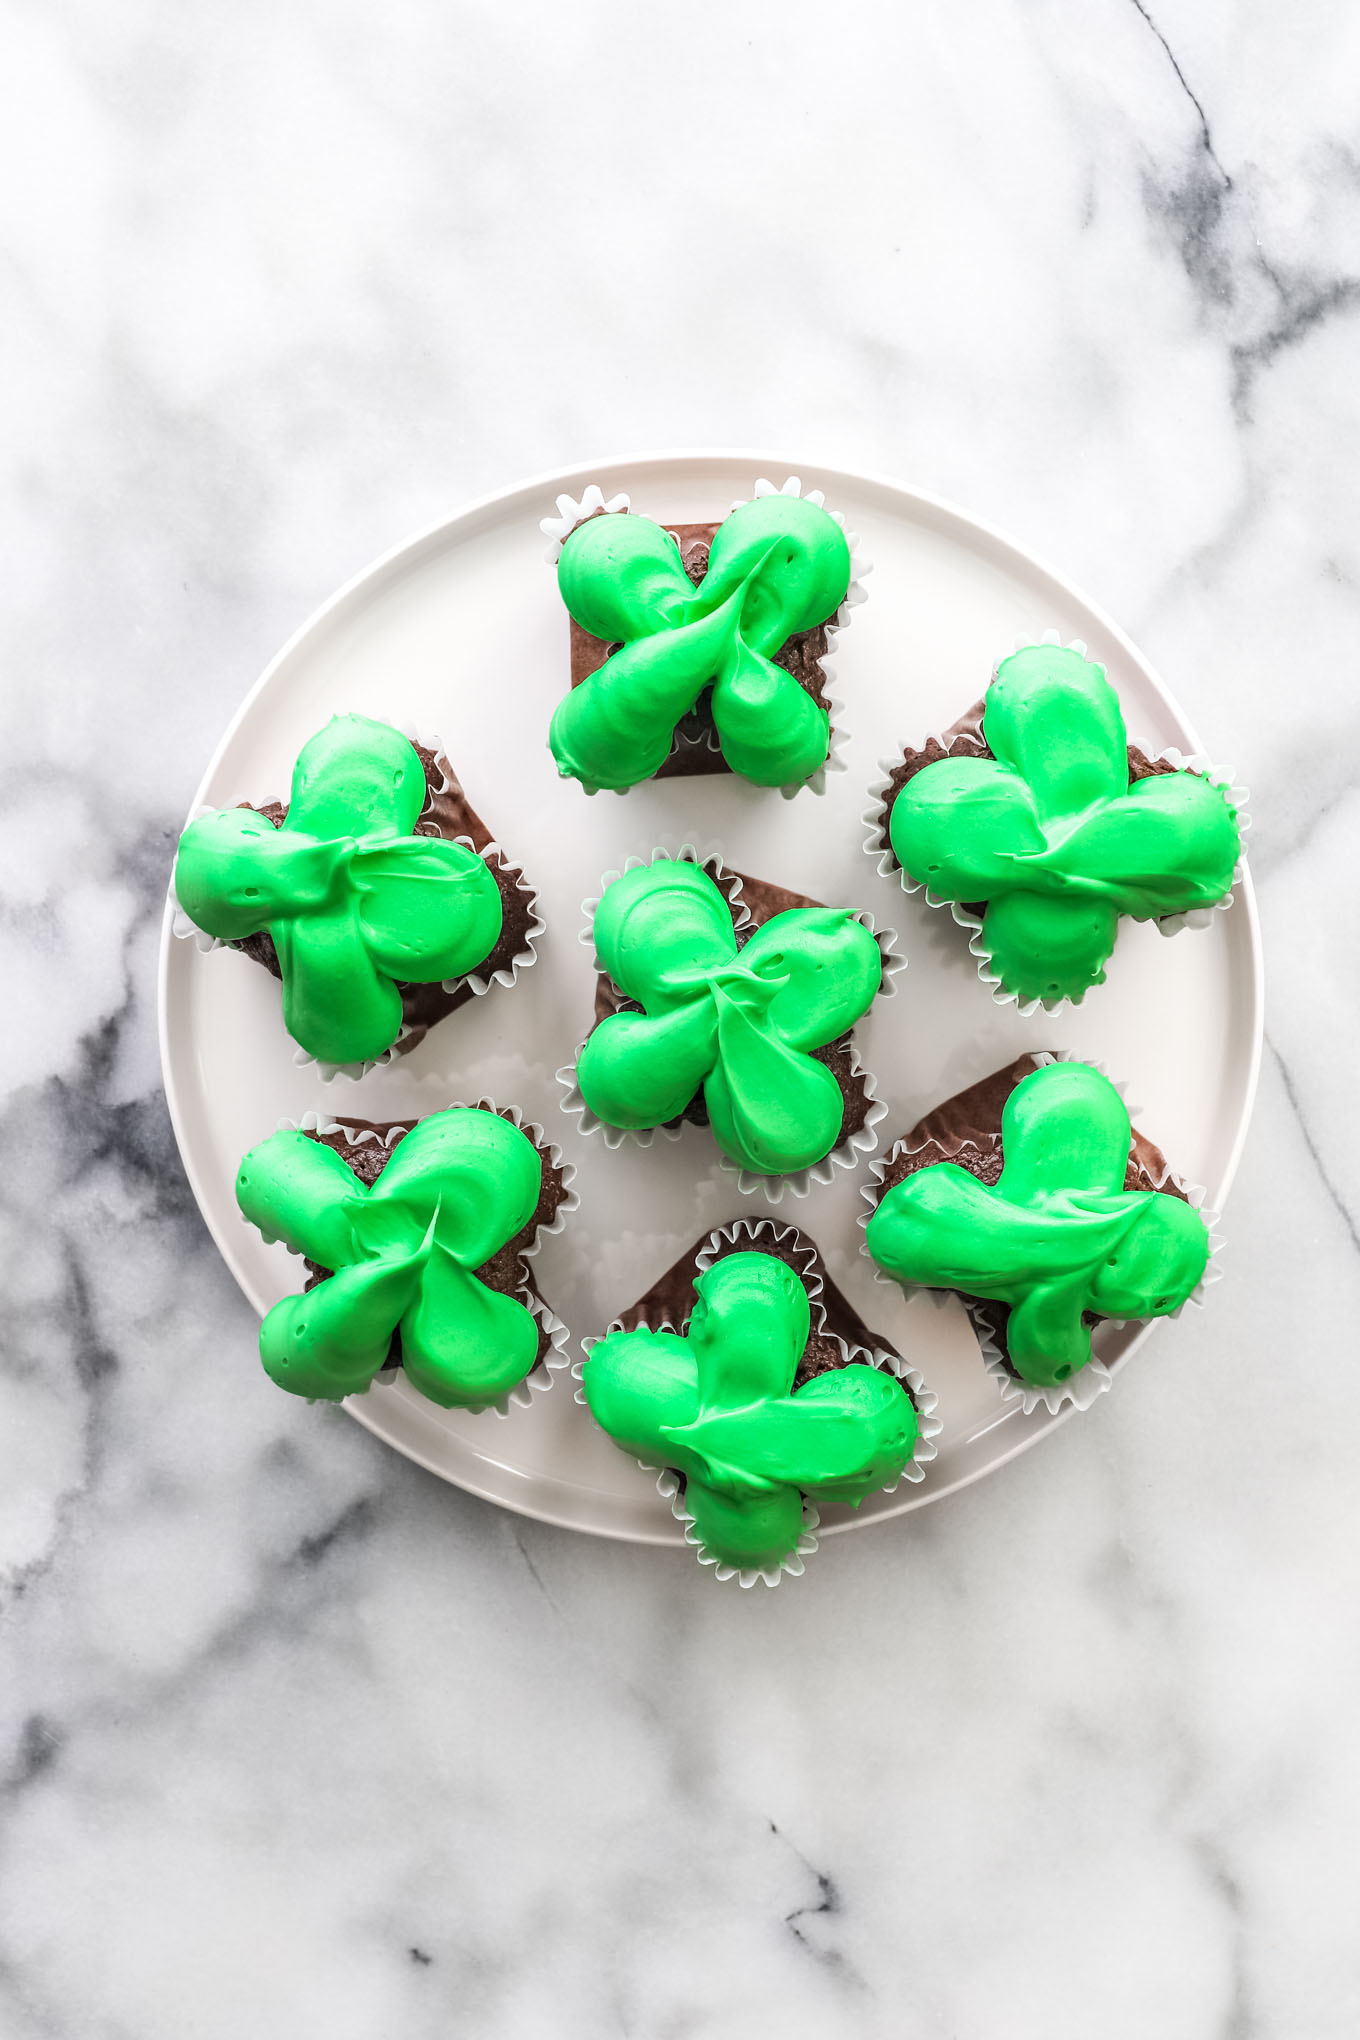 St. Patrick's Day cupcakes